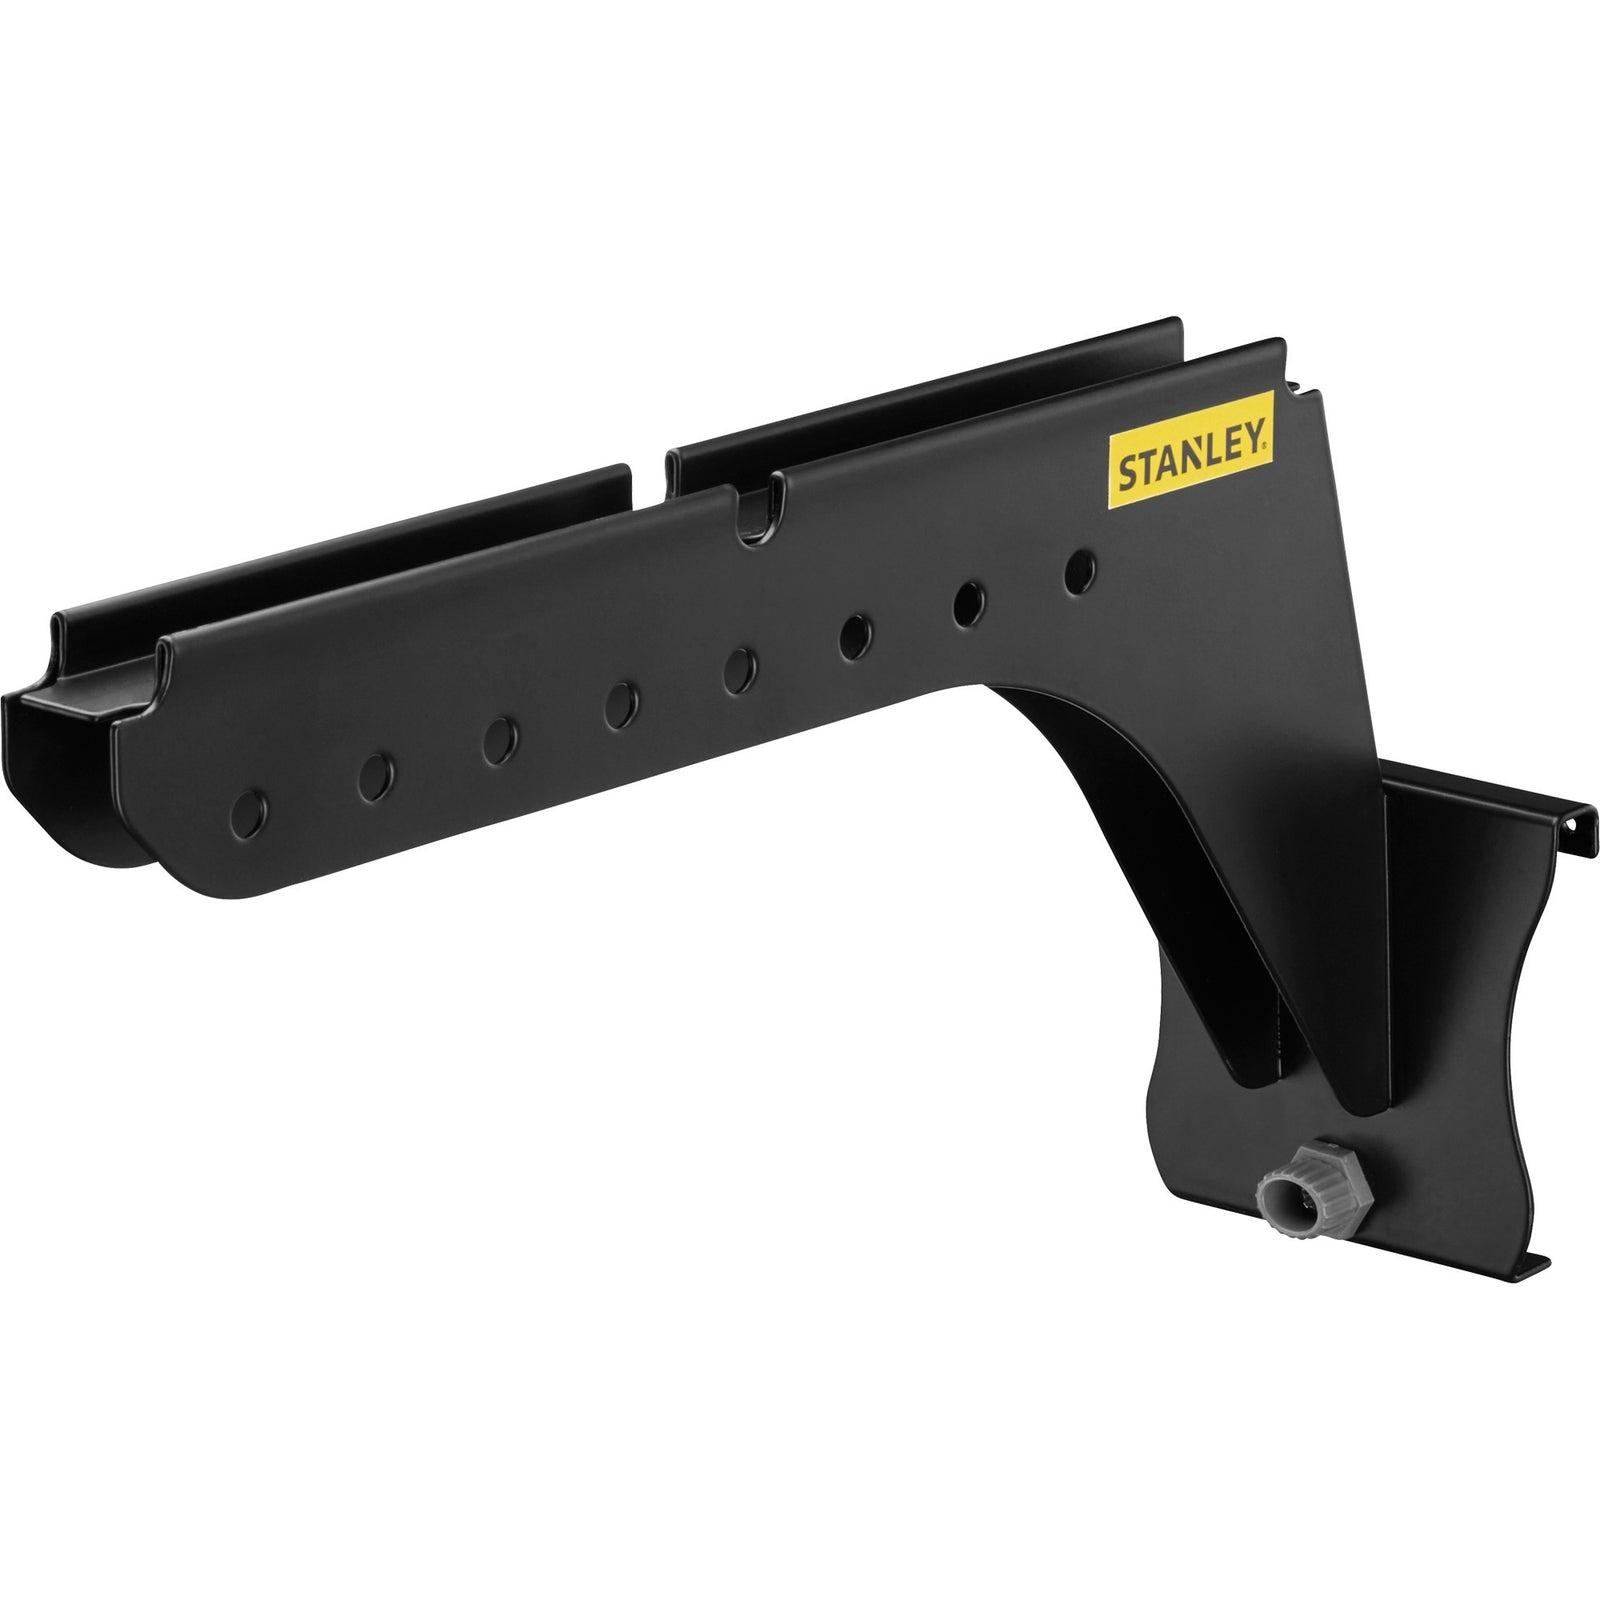 Stanley Stanley Track Wall Schapdrager